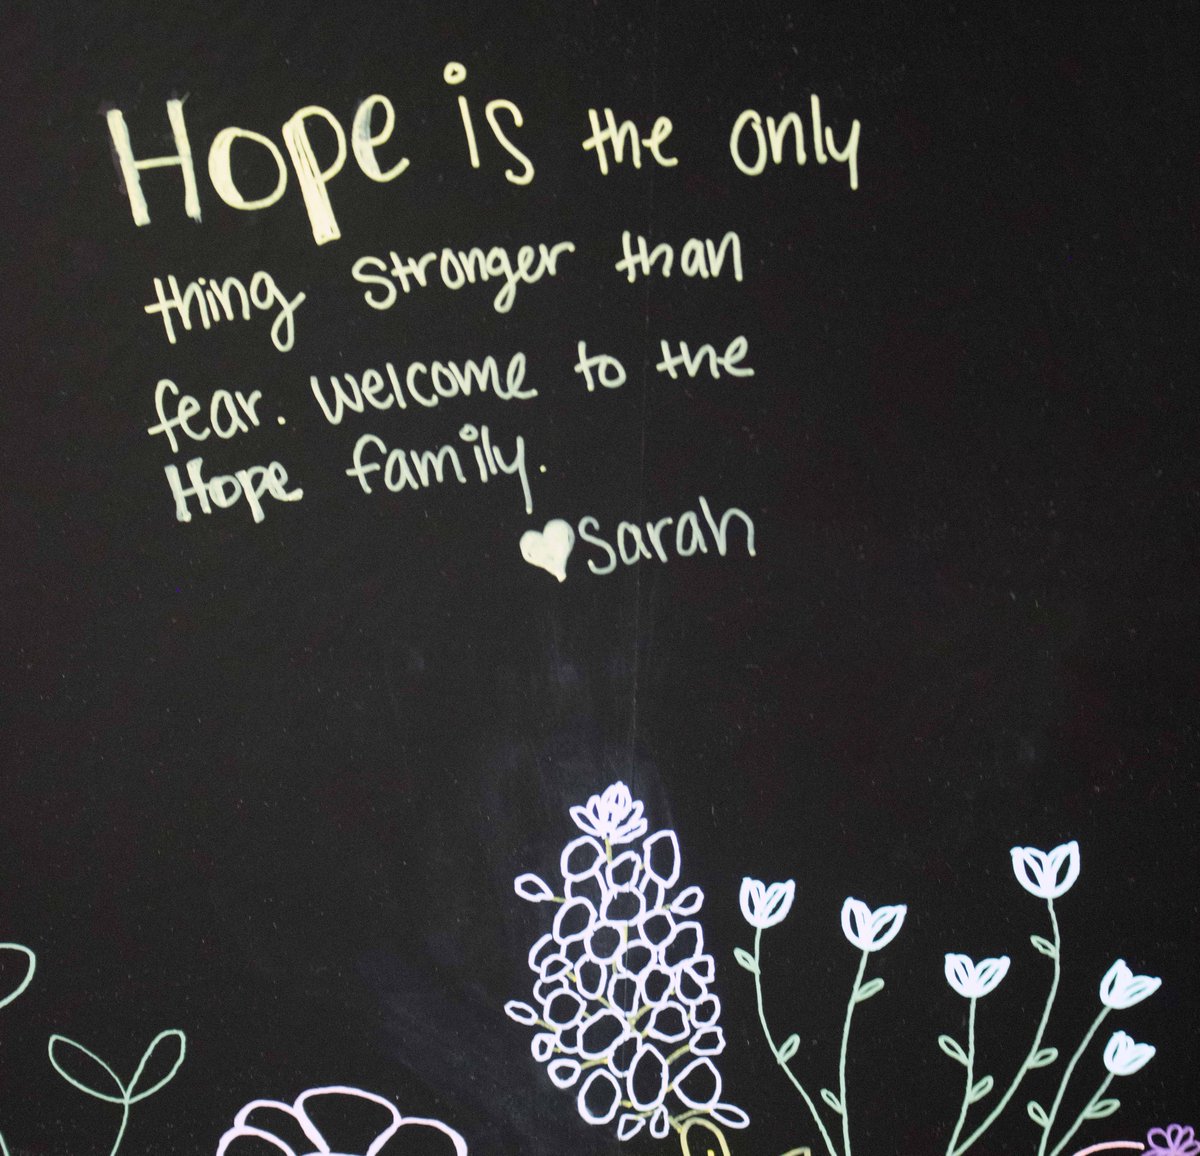 Hot take: “Hope is the only thing stronger than fear.” #scienceinservice #mondaymotivation #hope